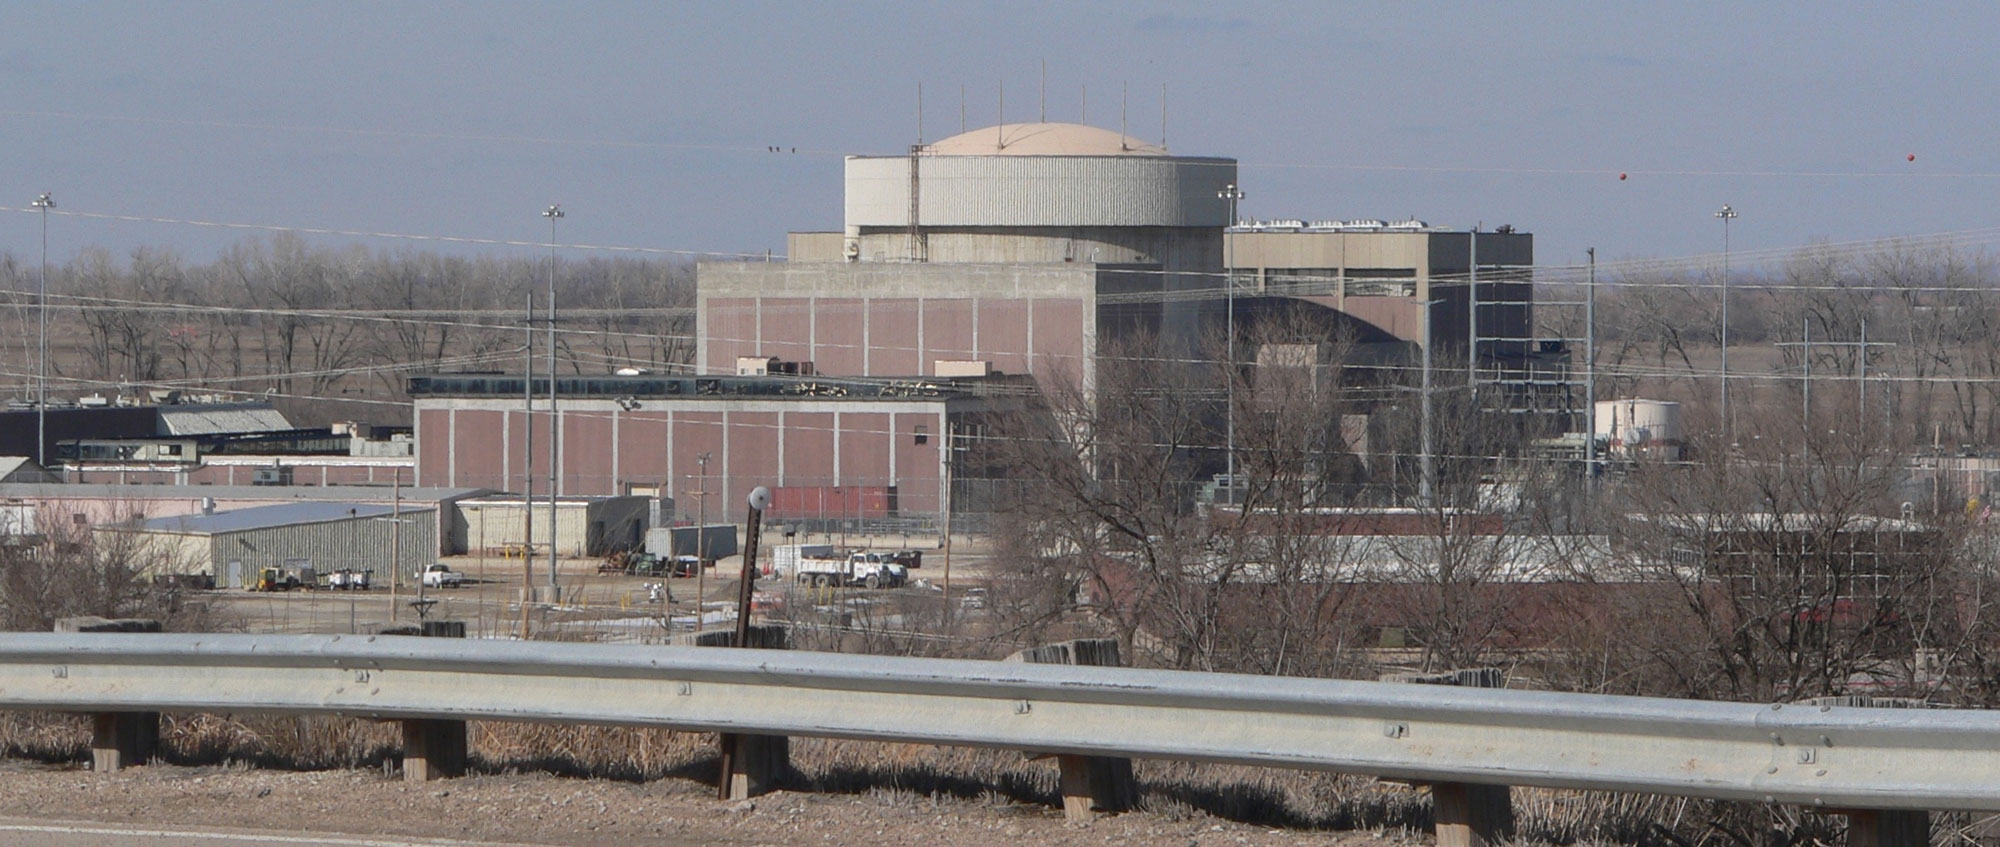 Photograph of Fort Calhoun Nuclear Generating Station in Nebraska. The image shows a large brick and concrete building with several levels, the highest appearing to be a cylindrical structure capped by a convex roof. The landscape around the station is forested, the leafless trees (indicating that it is probably winter).